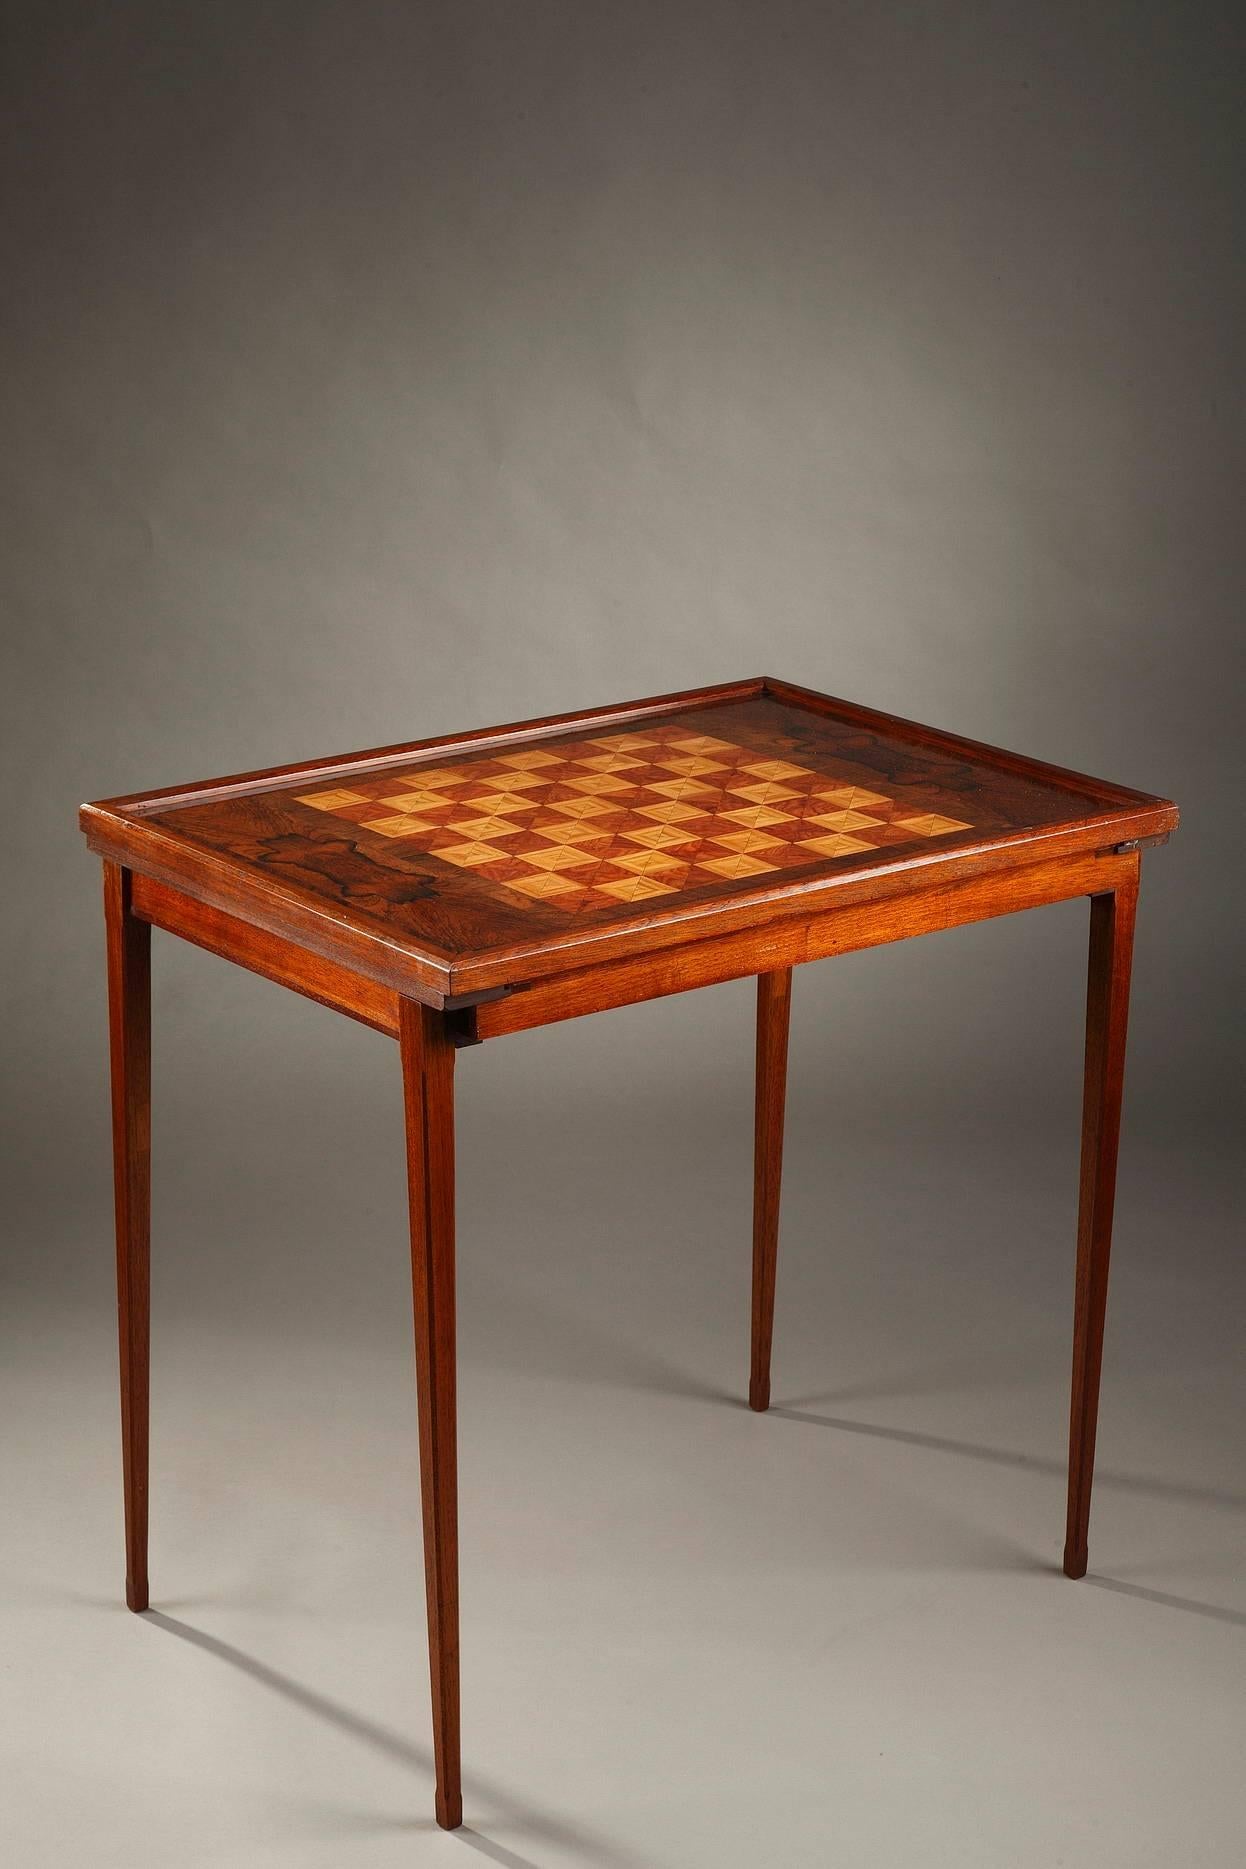 Scandinavian game table from the fifties in rosewood veneer and mahogany, the table top inlaid with central marquetry for playing chess. The sliding top reveals a large drawer inside fitted for games pieces: 60 game pieces for chess and 36 for